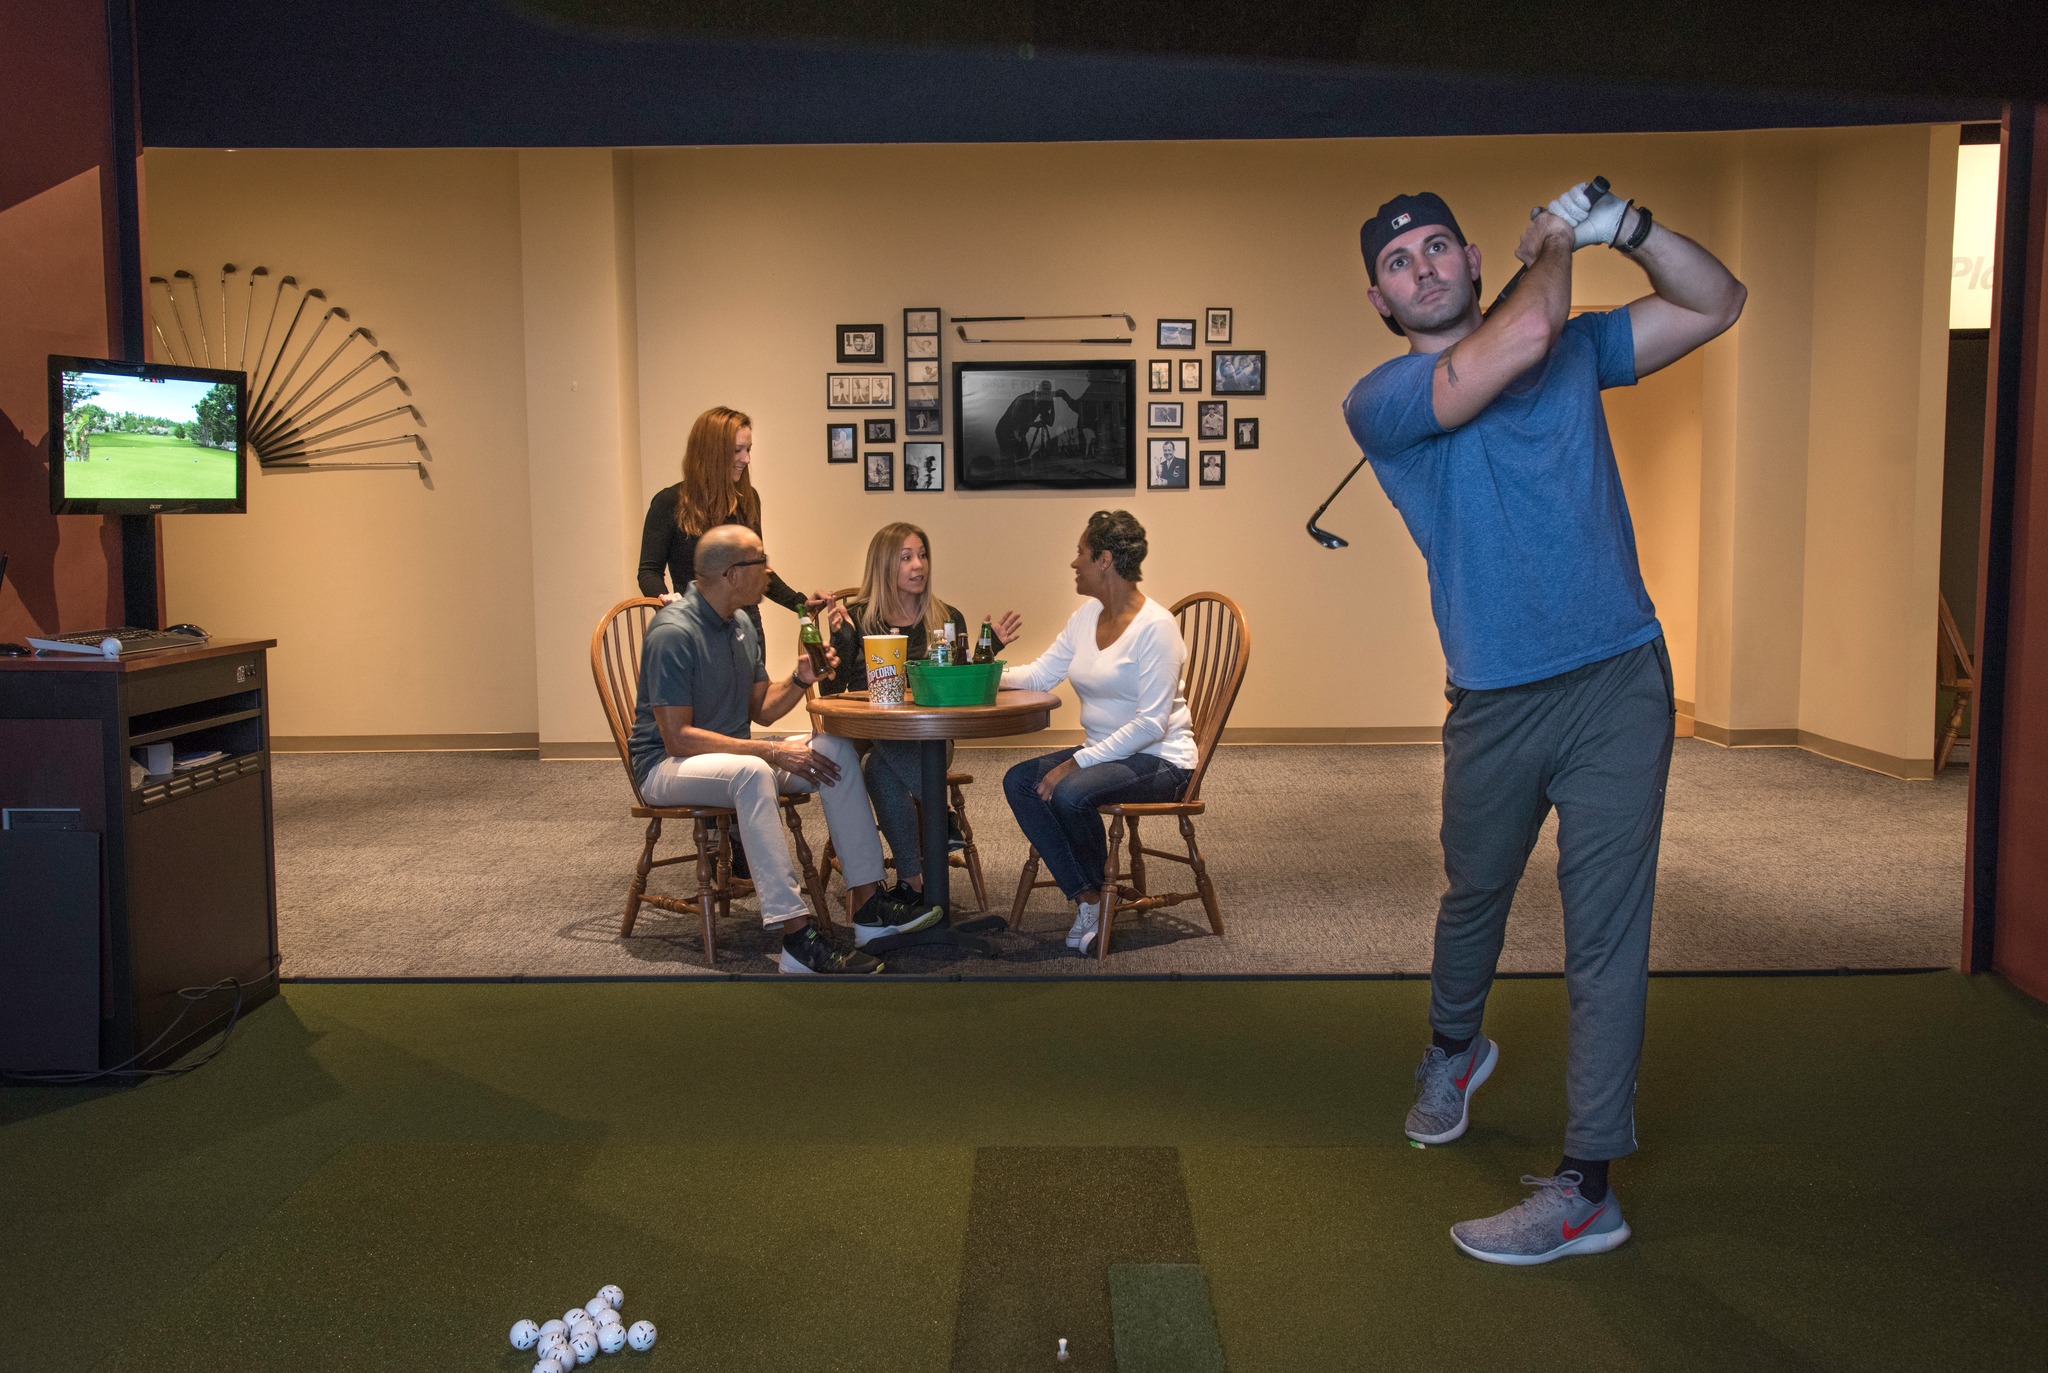 A man playing on a golf simulator a group of friends on Ardmore or Malvern, PA